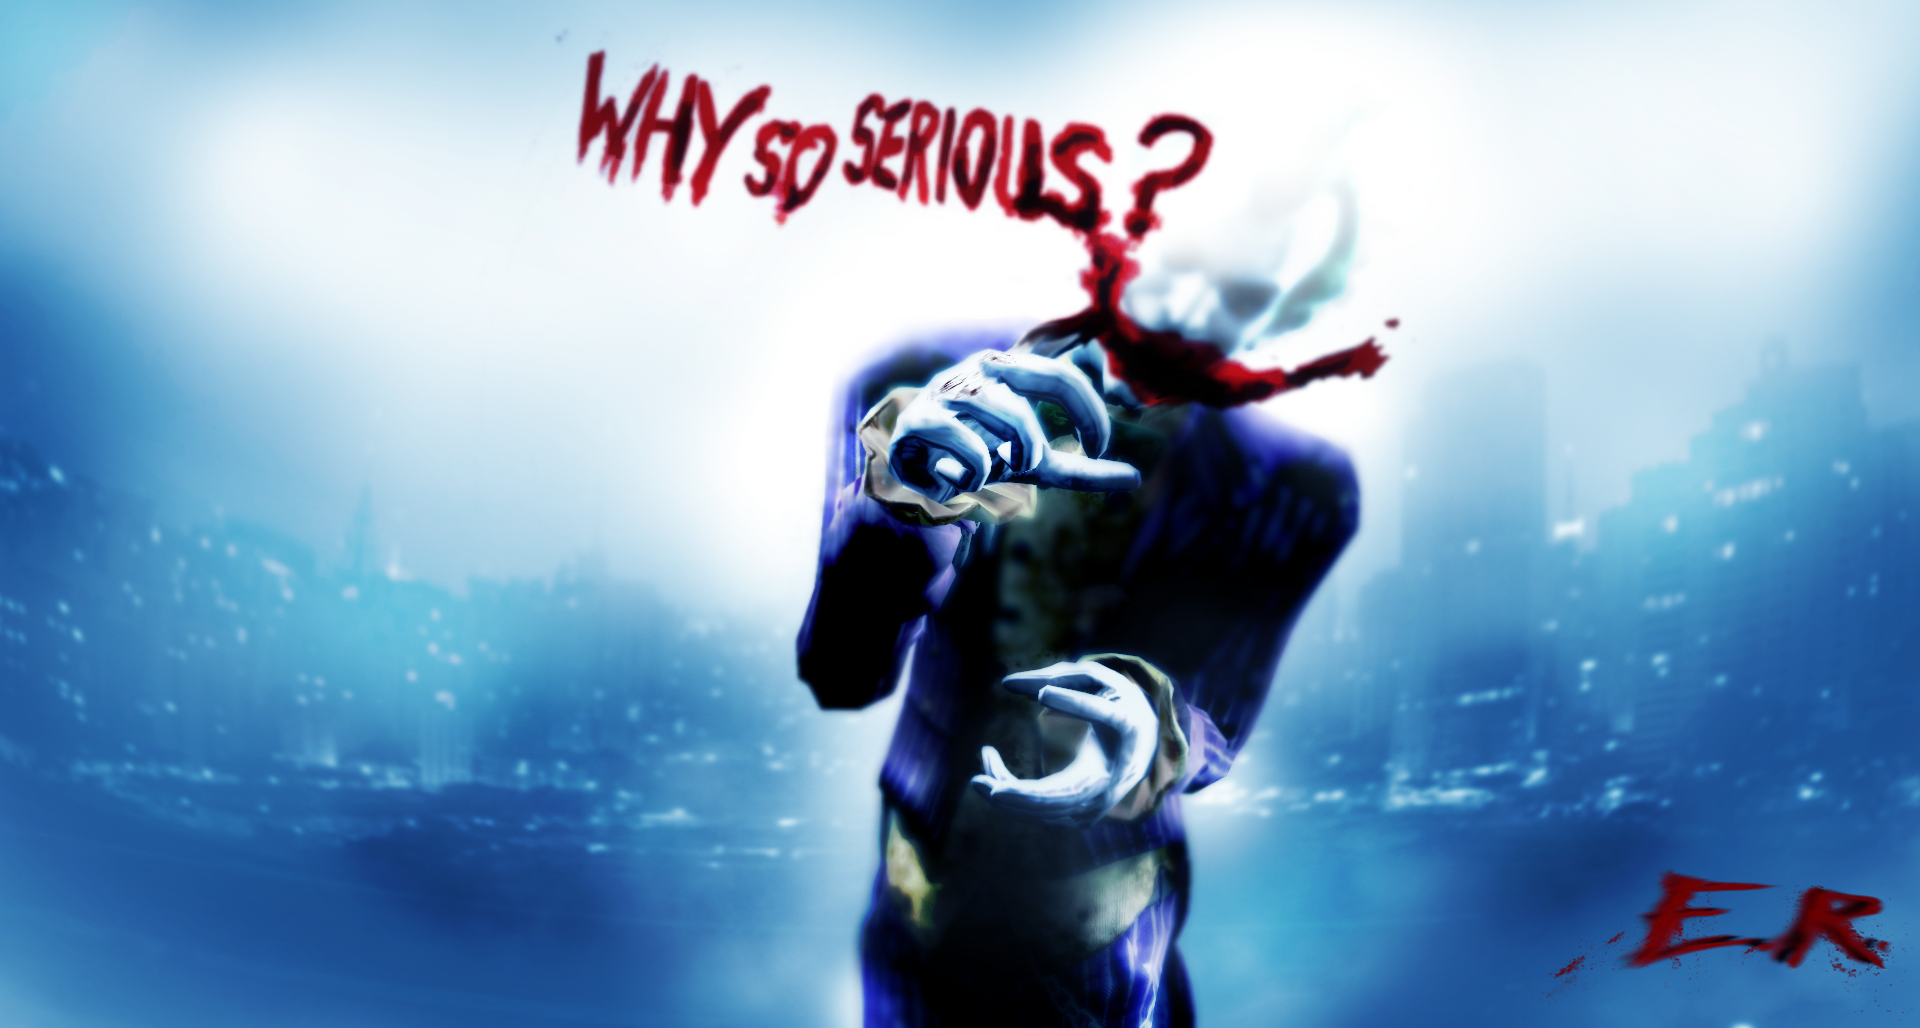 Why So Serious? Wallpapers - Wallpaper Cave